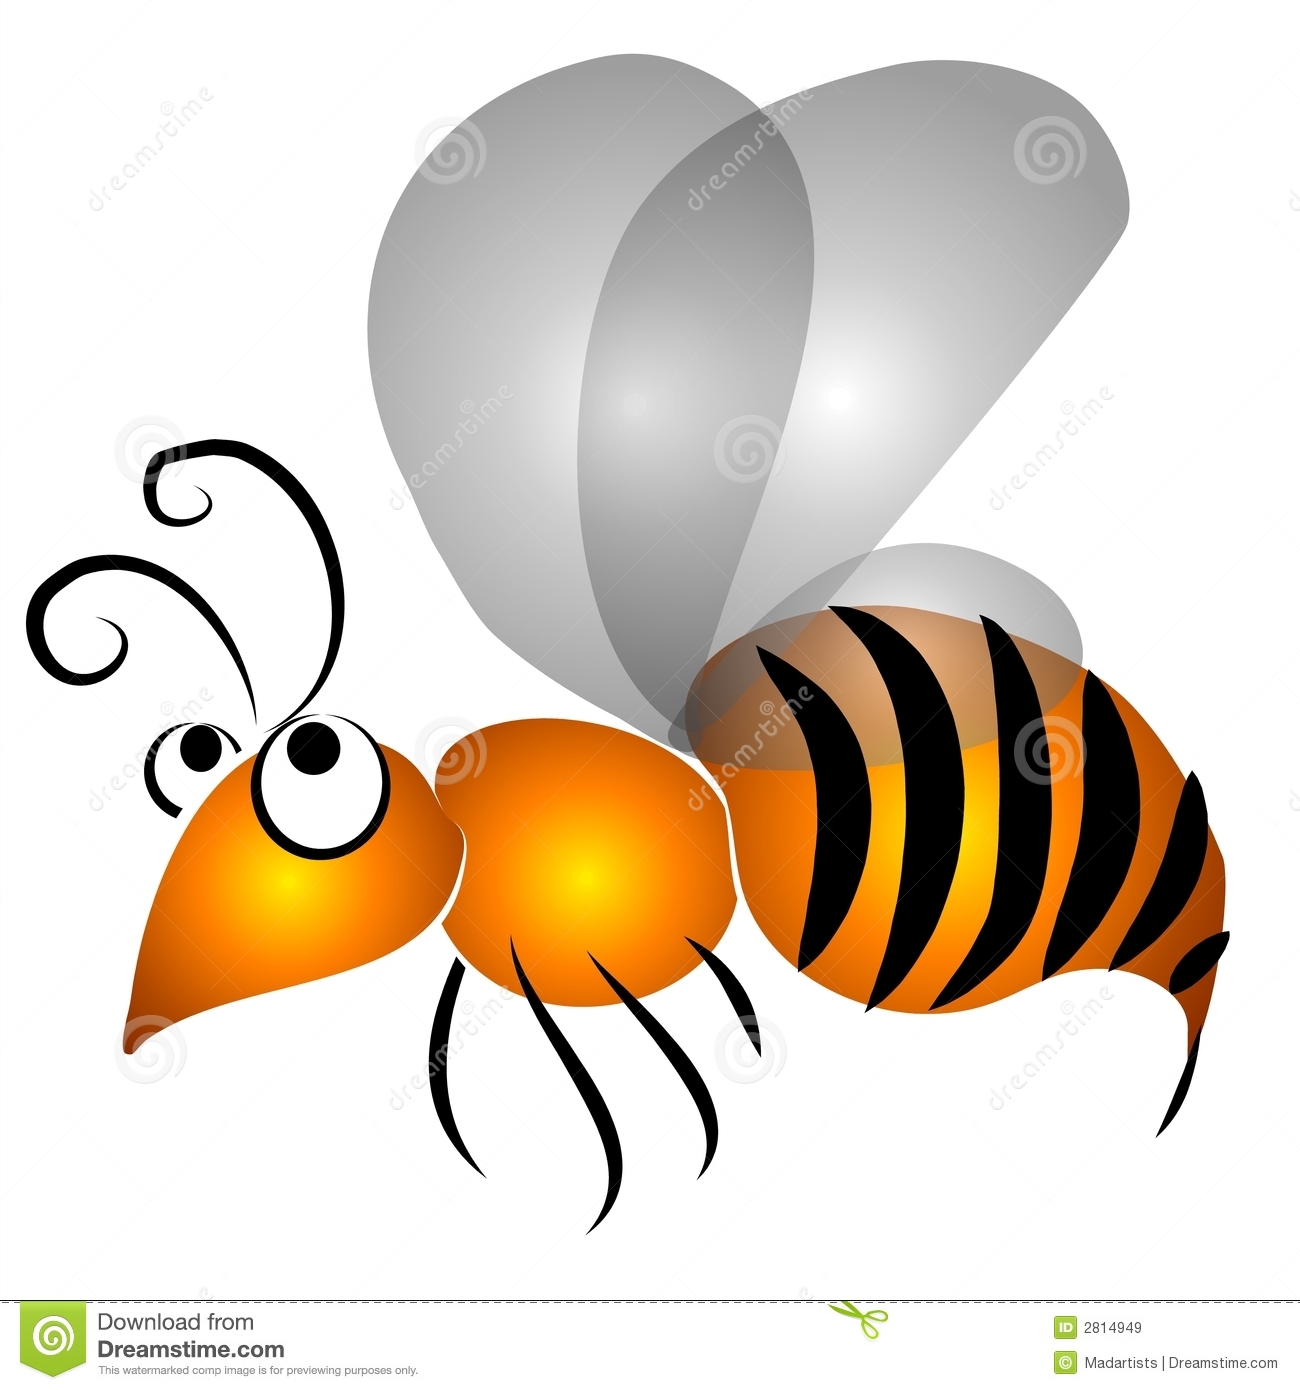 Royalty Free Stock Images  Cartoon Flying Wasp Clip Art